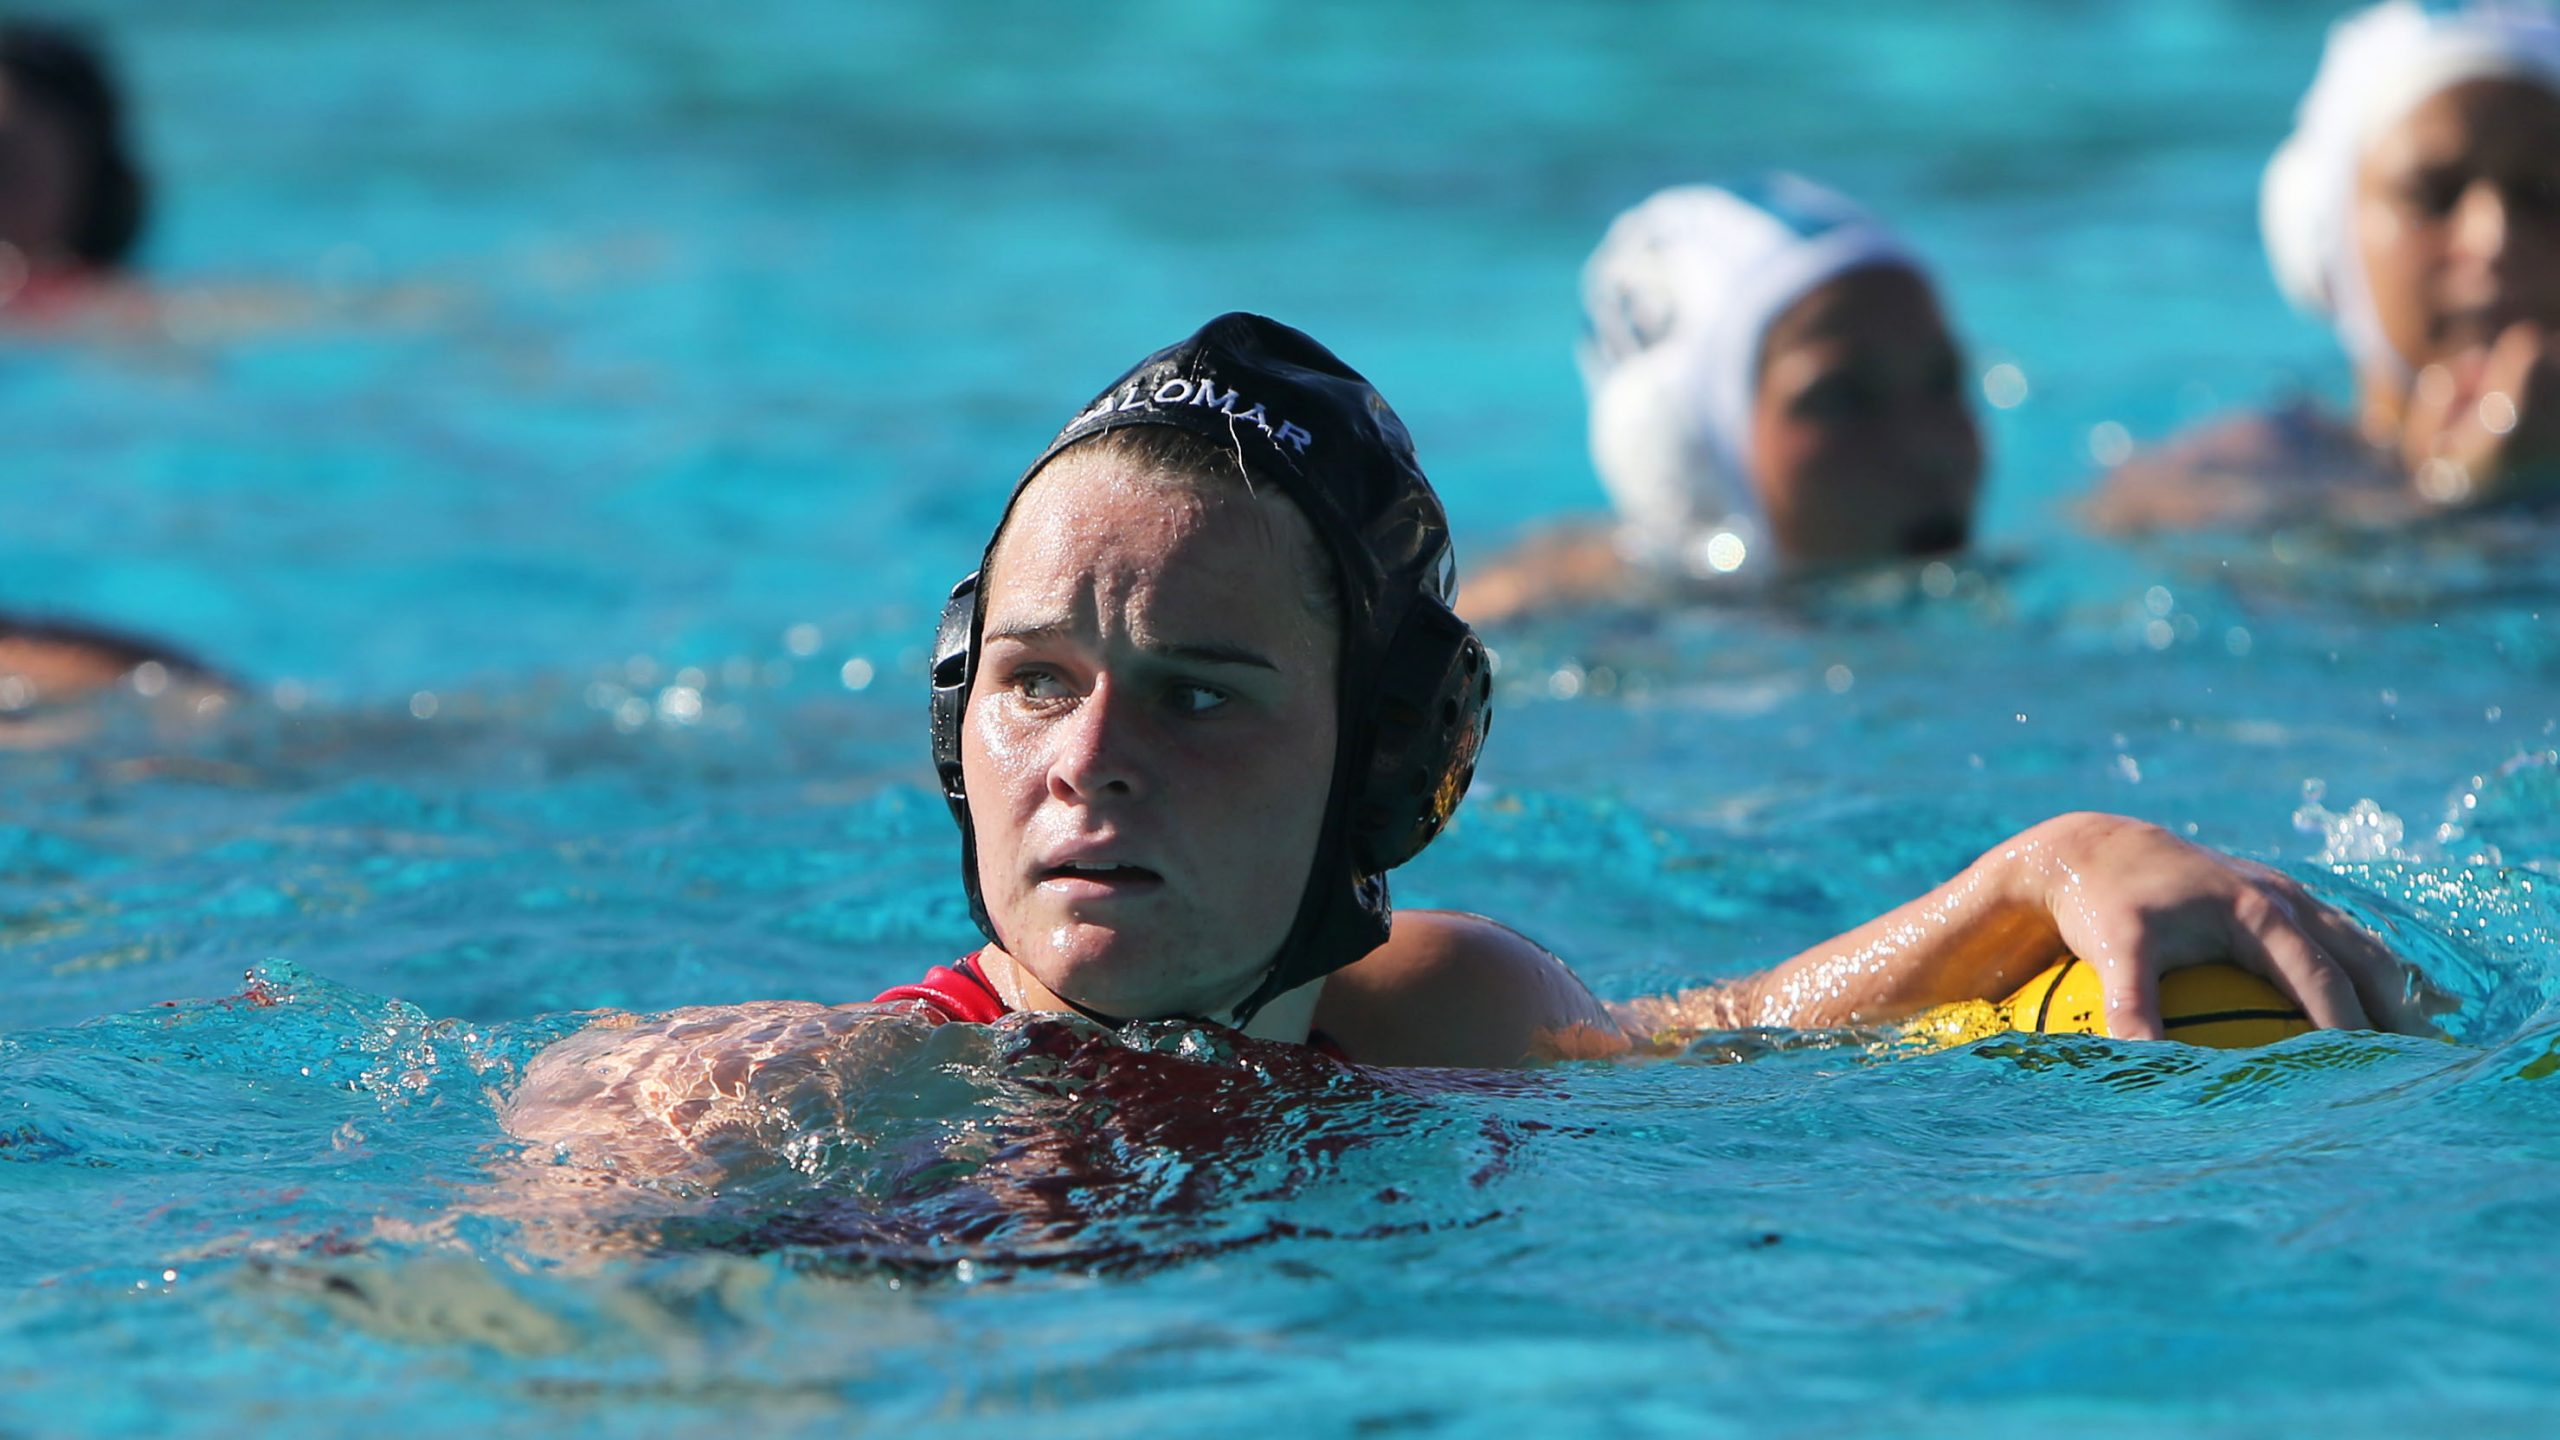 Palomar Athlete Syndi Dickson in the pool recently.